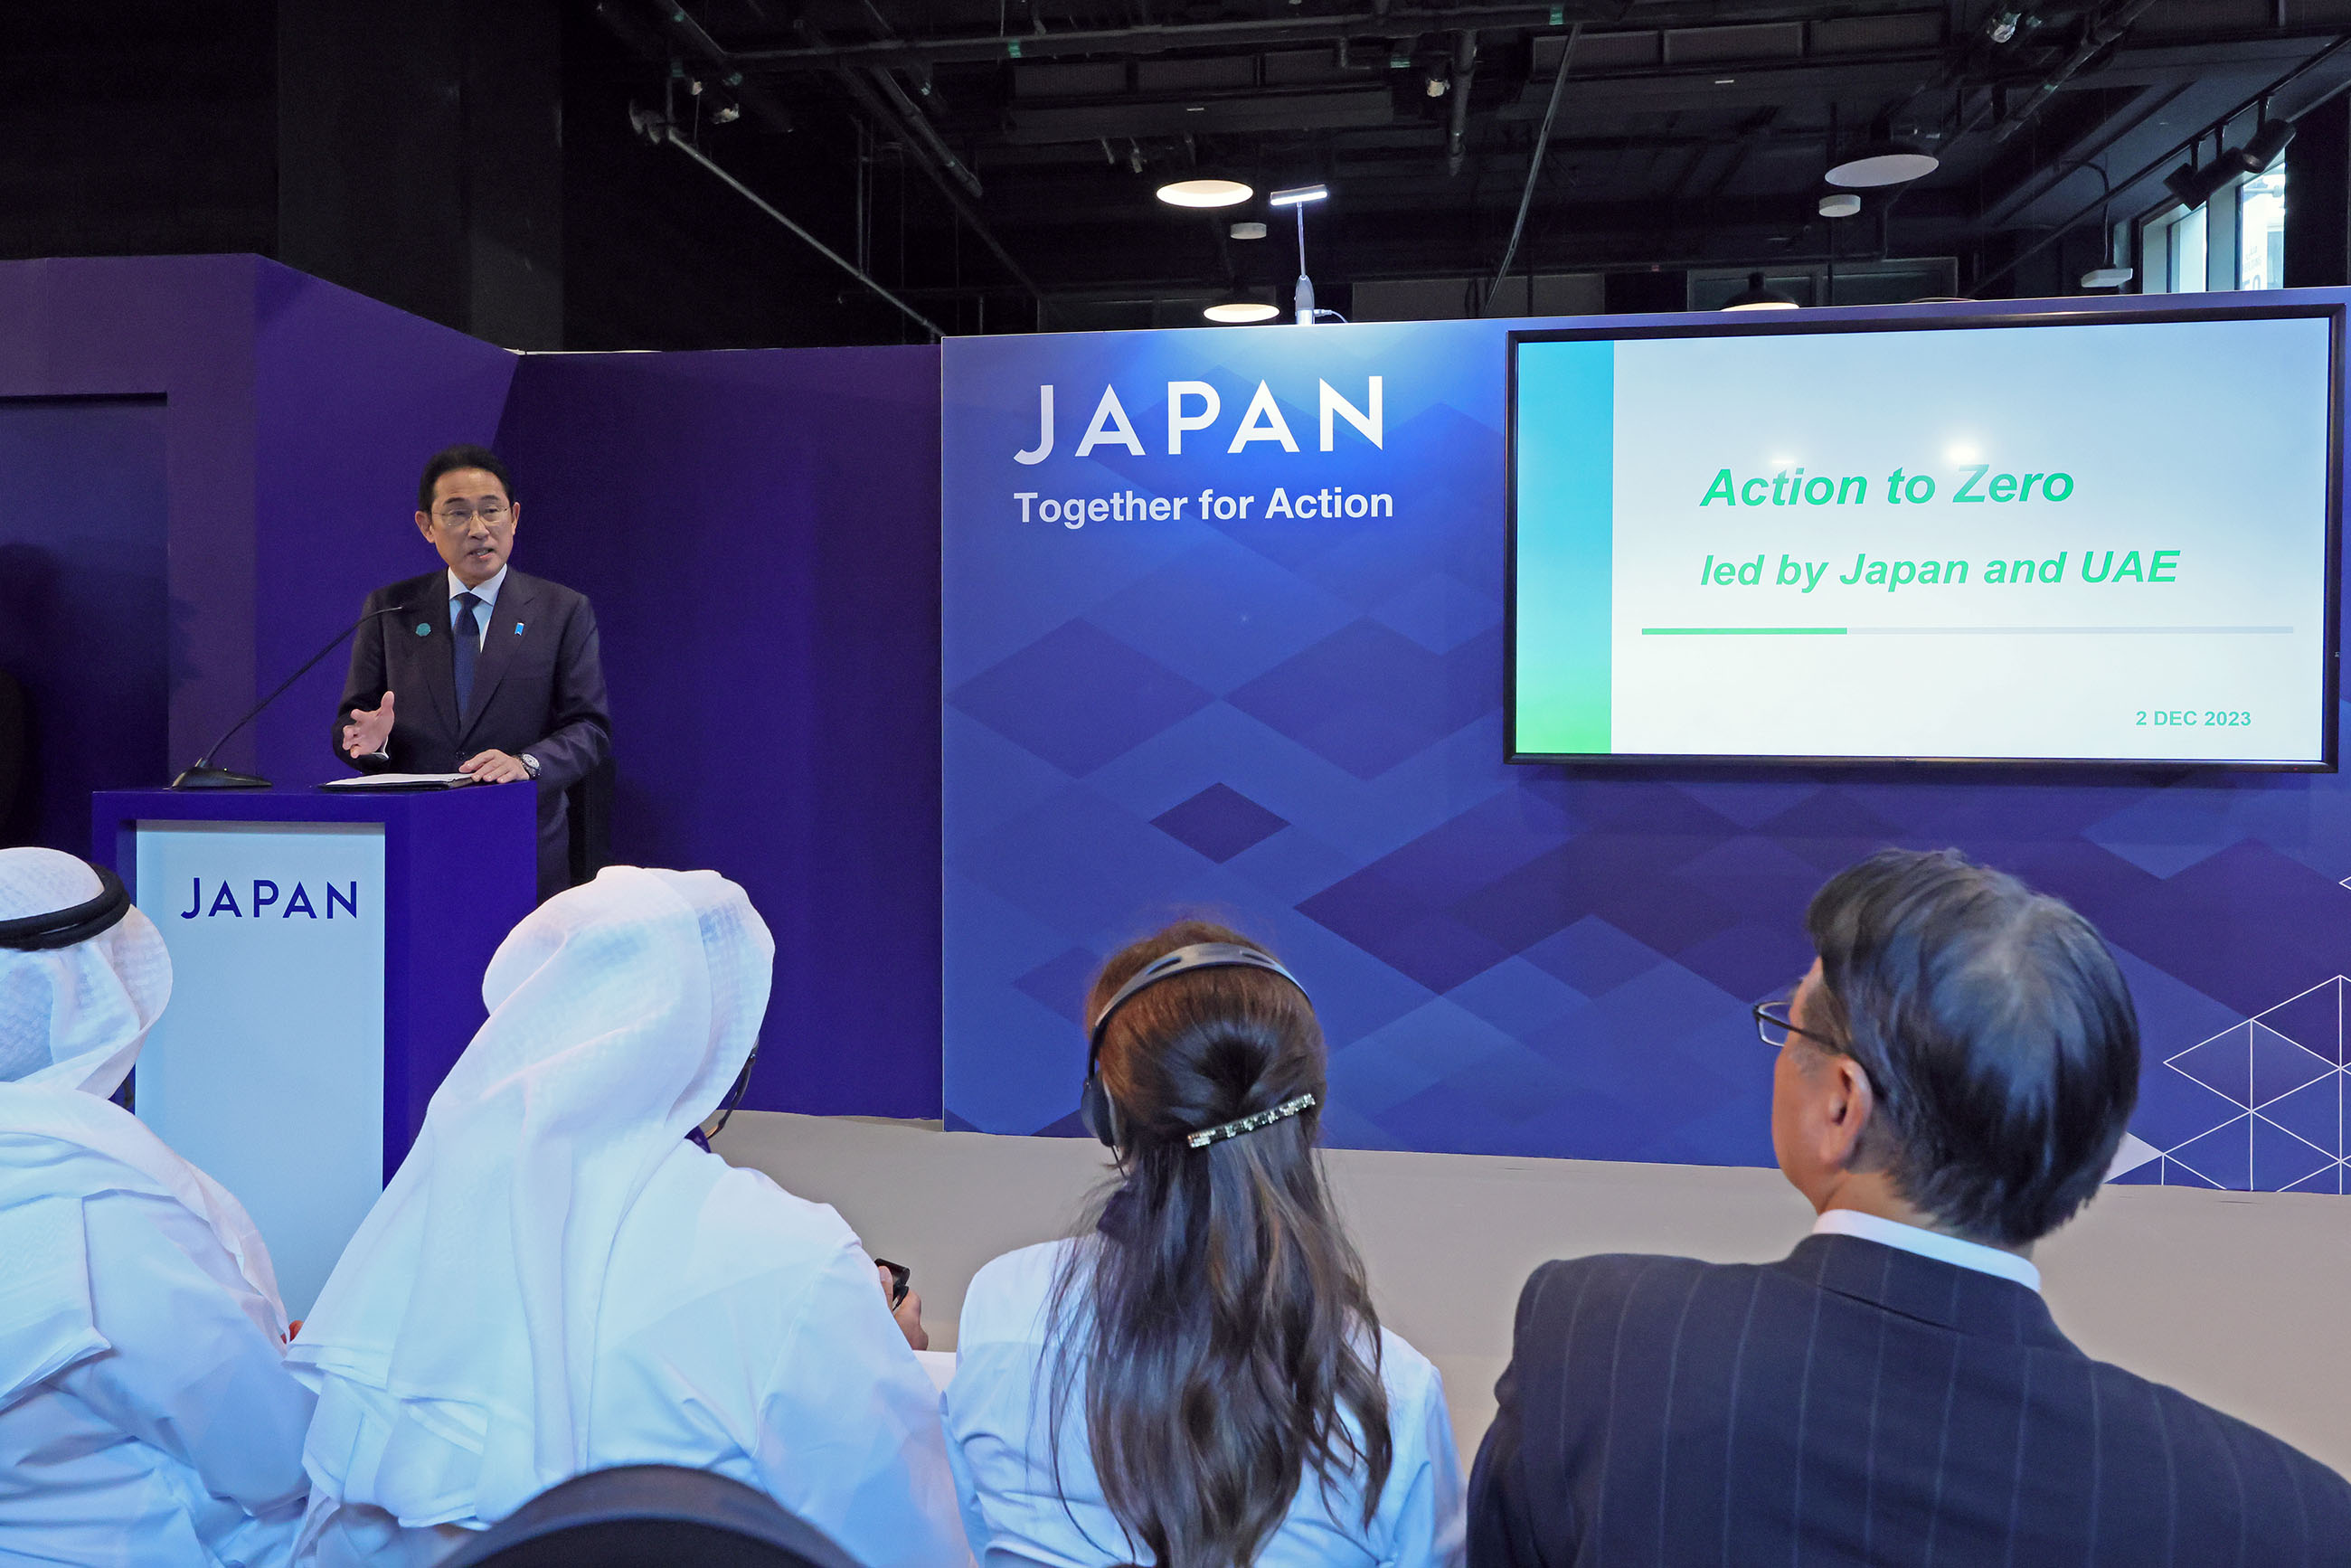 Action to Zero led by Japan and UAE (9)